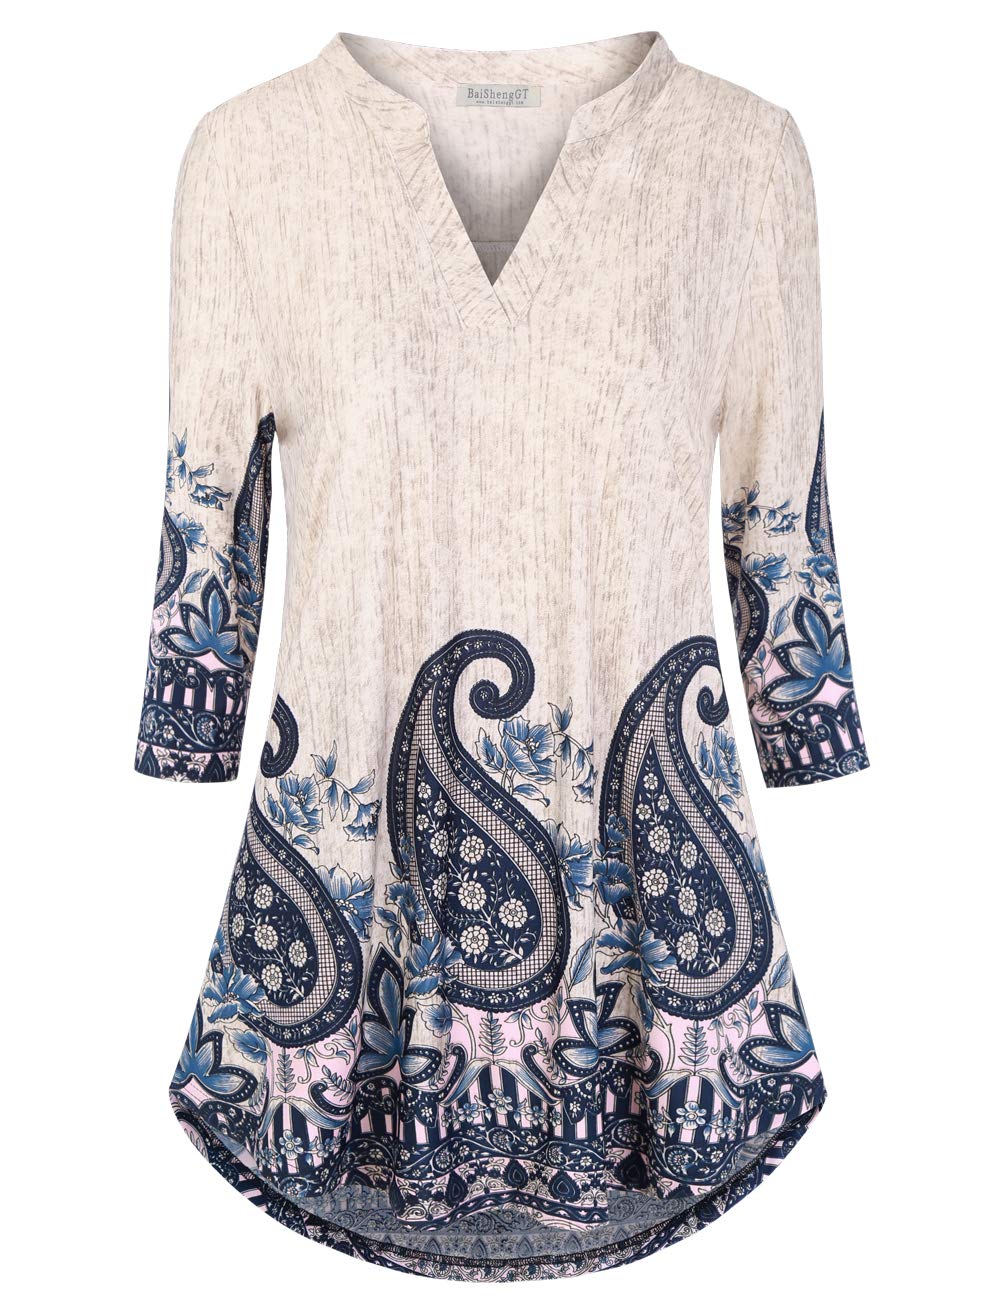 BAISHENGGT Aprioct Paisley Womens 3/4 Sleeve Floral Printed Notch V Neck Blouses Tunics Tops